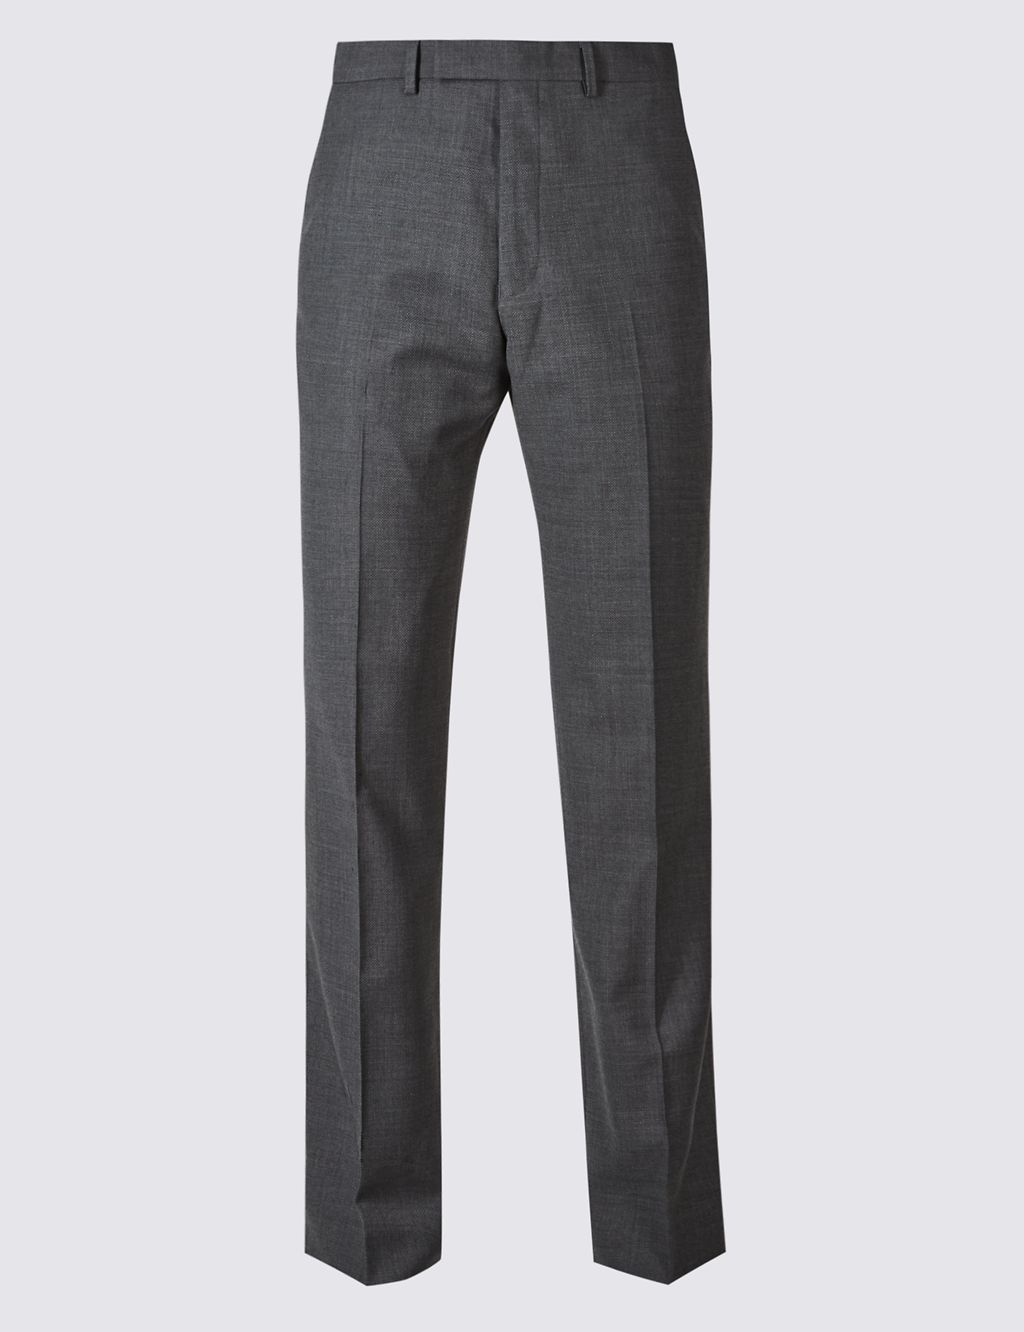 Charcoal Textured Regular Fit Wool Trousers 1 of 7